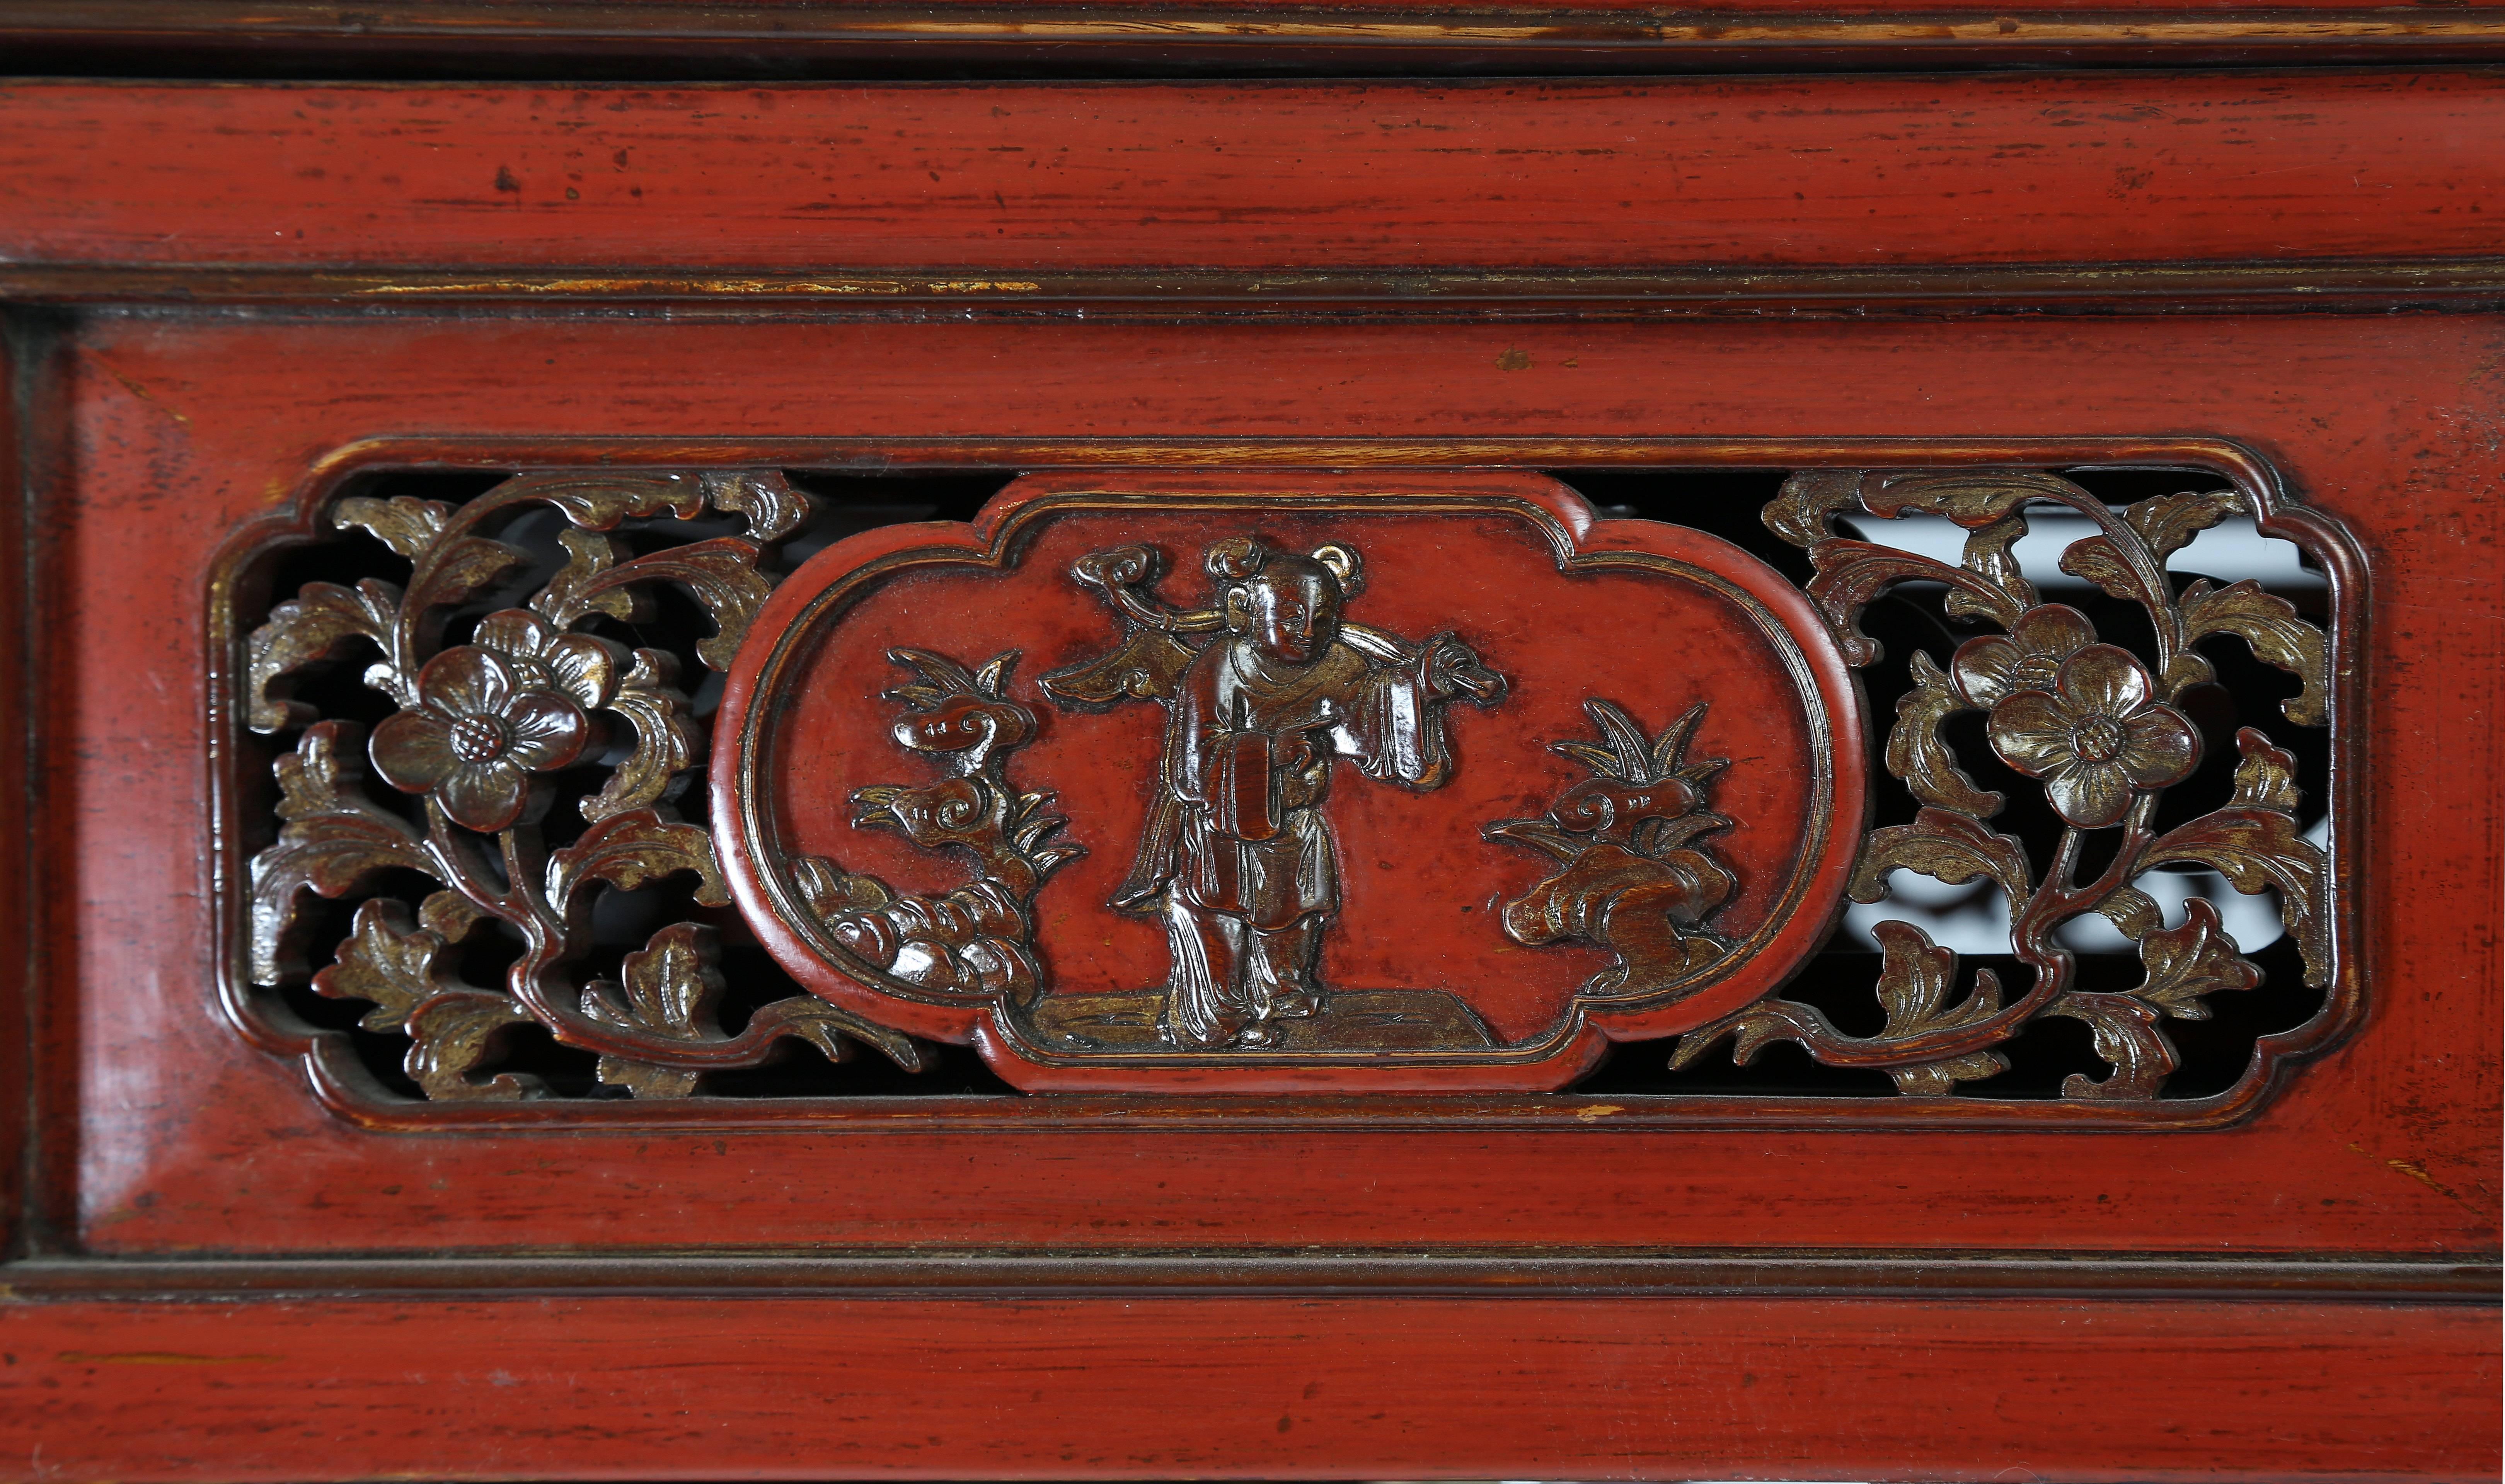 Qing Antique Red Lacquer Gilt Six-Posted Carved Canopy Wedding Bed, Chinoiserie